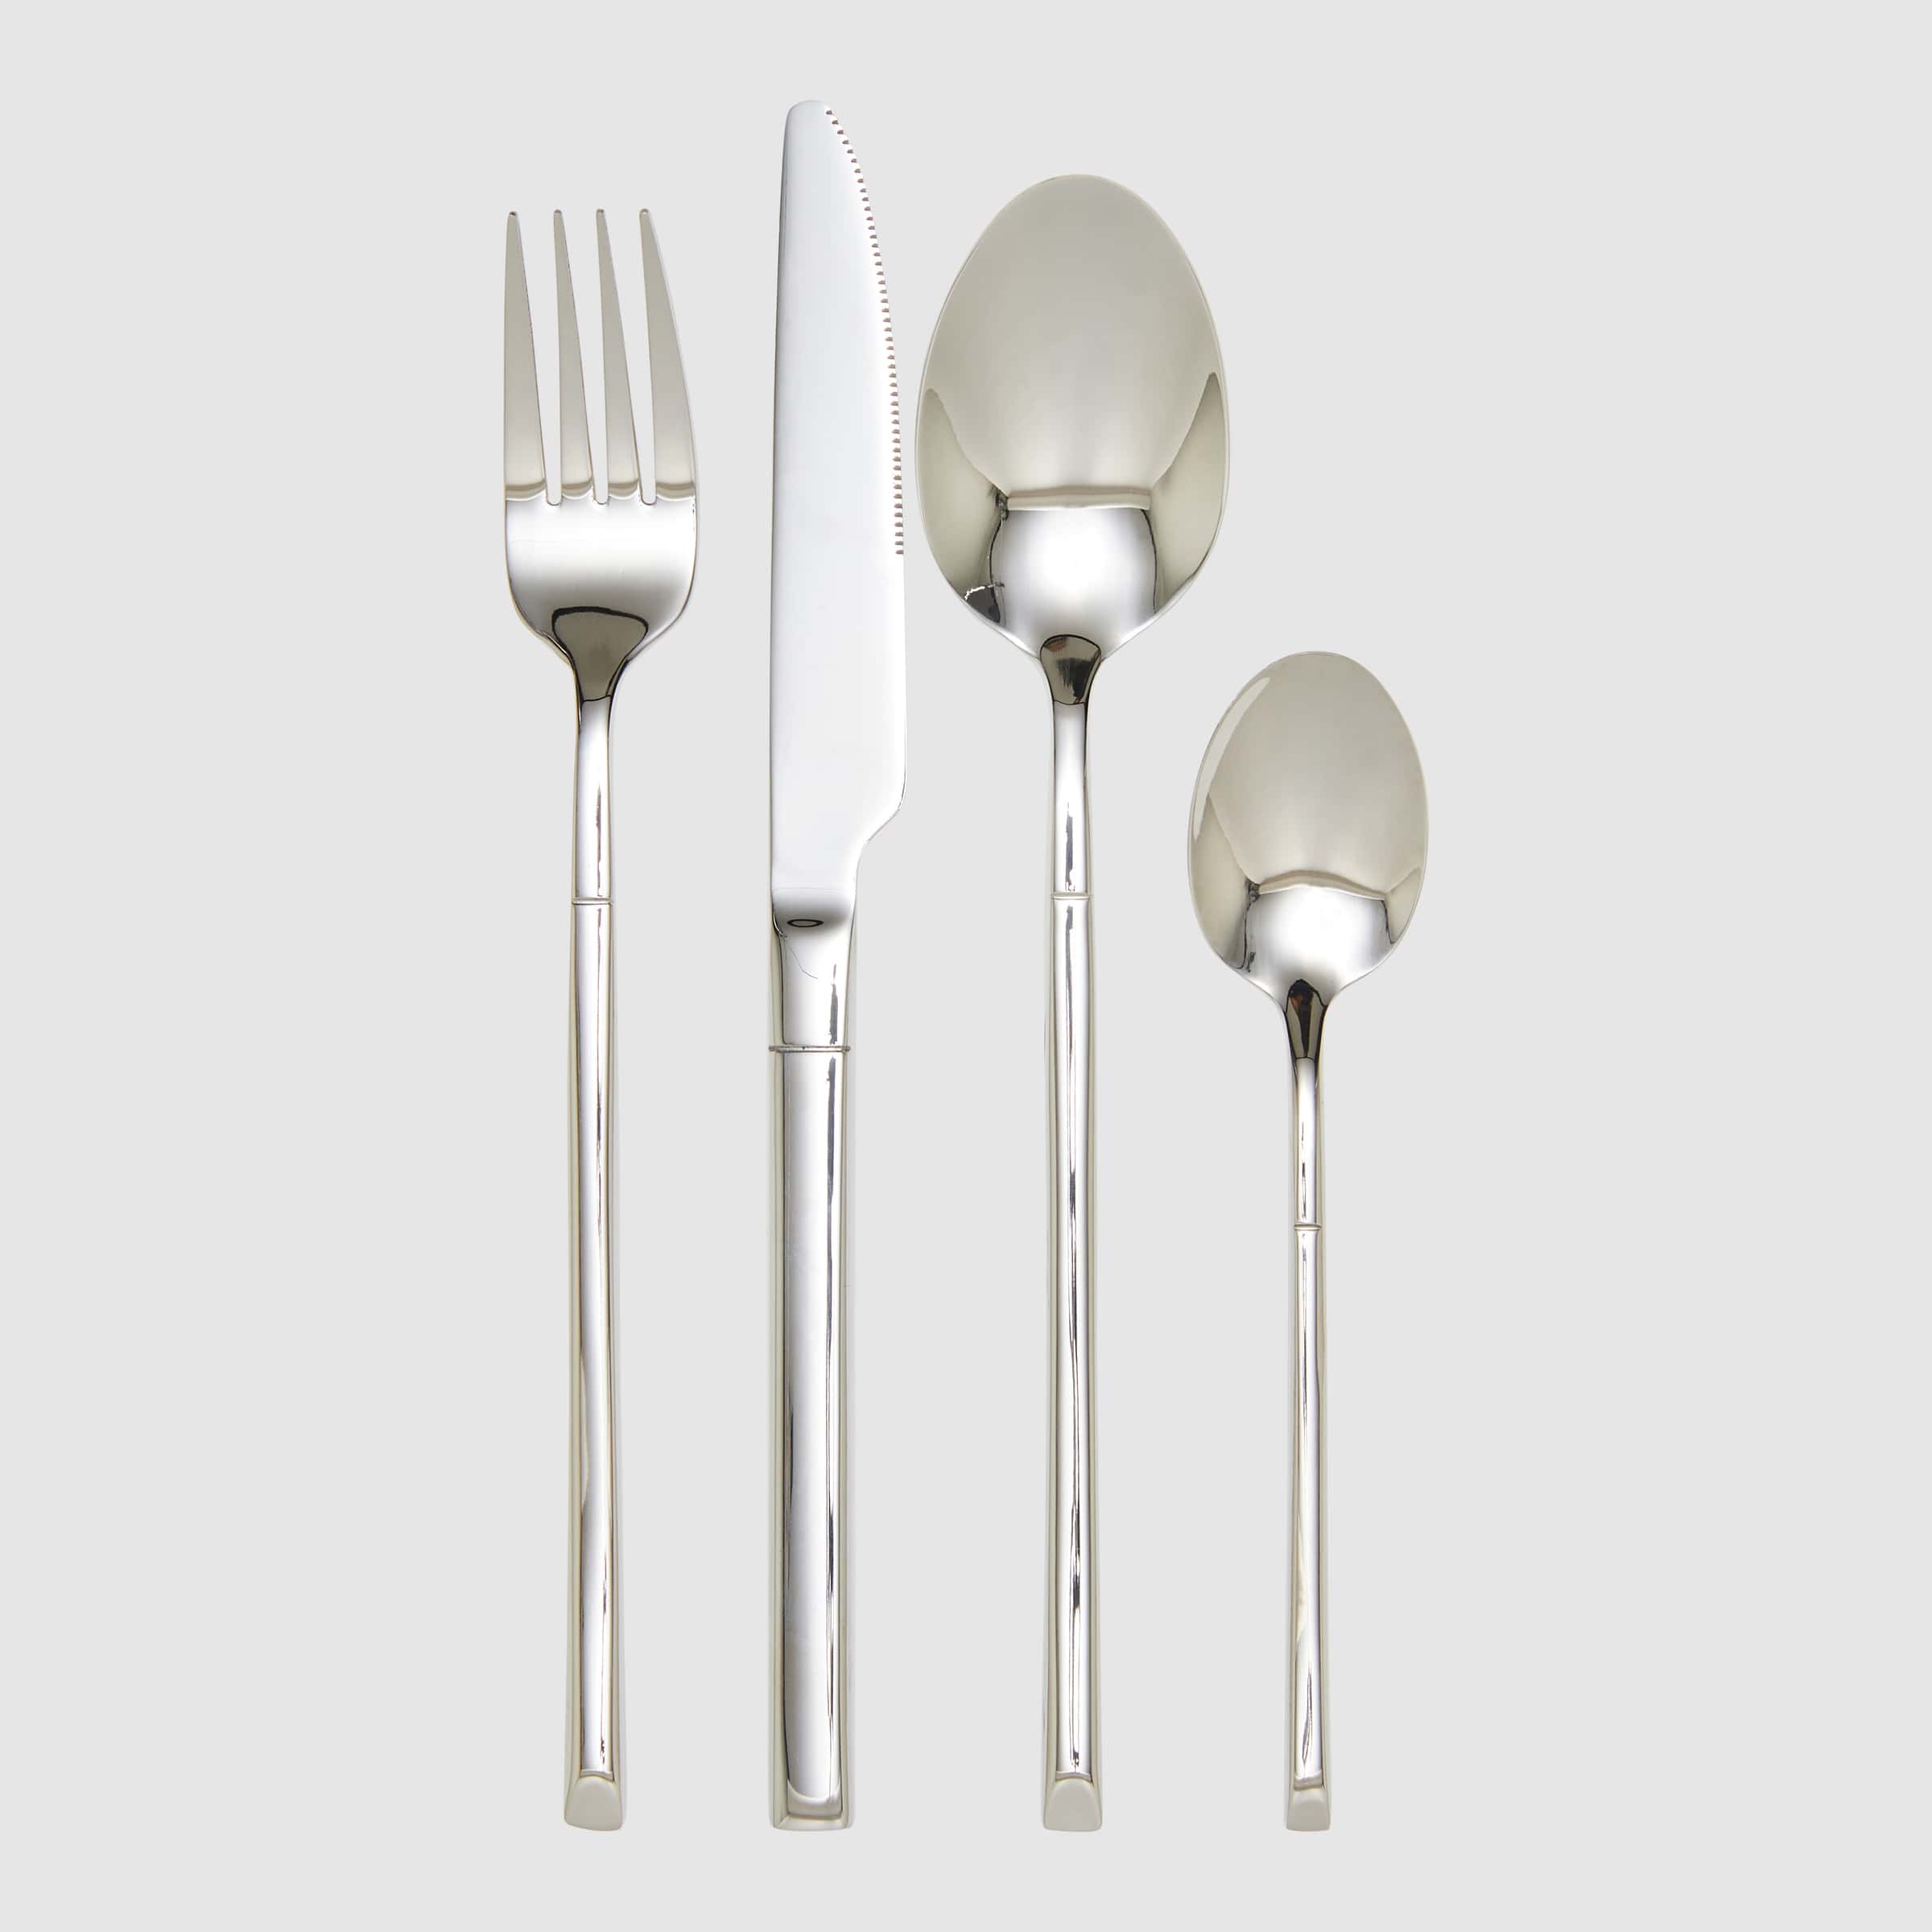 Moroccan Cutlery Set - 4pc - Buy Flatware Sets Online at FRANKY'S